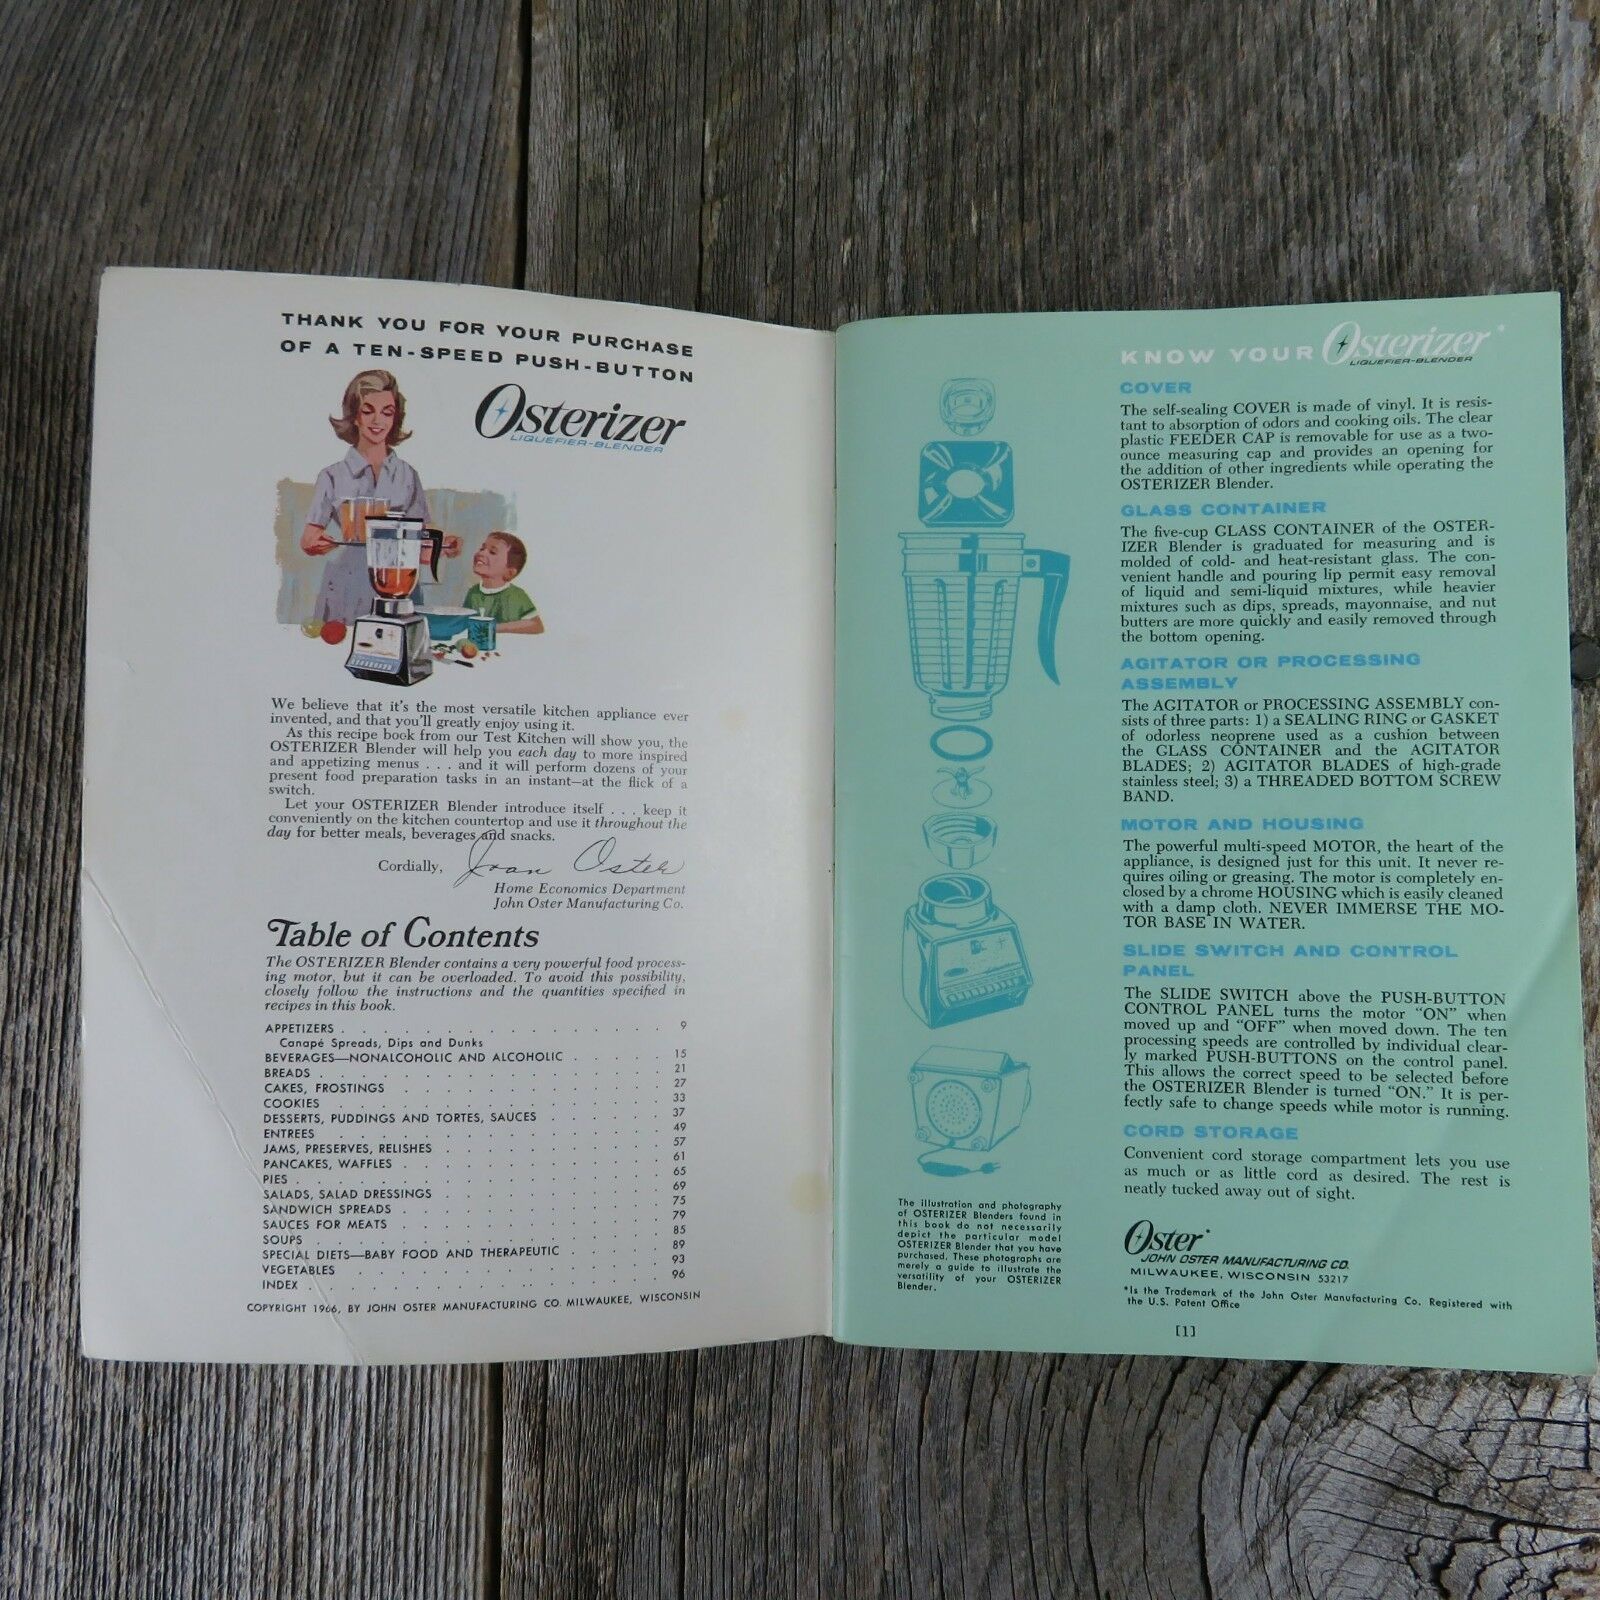 Spin Cookery Blender Cook Book 10 speed Push Button Pulse Matic Osterizer 1966 - At Grandma's Table